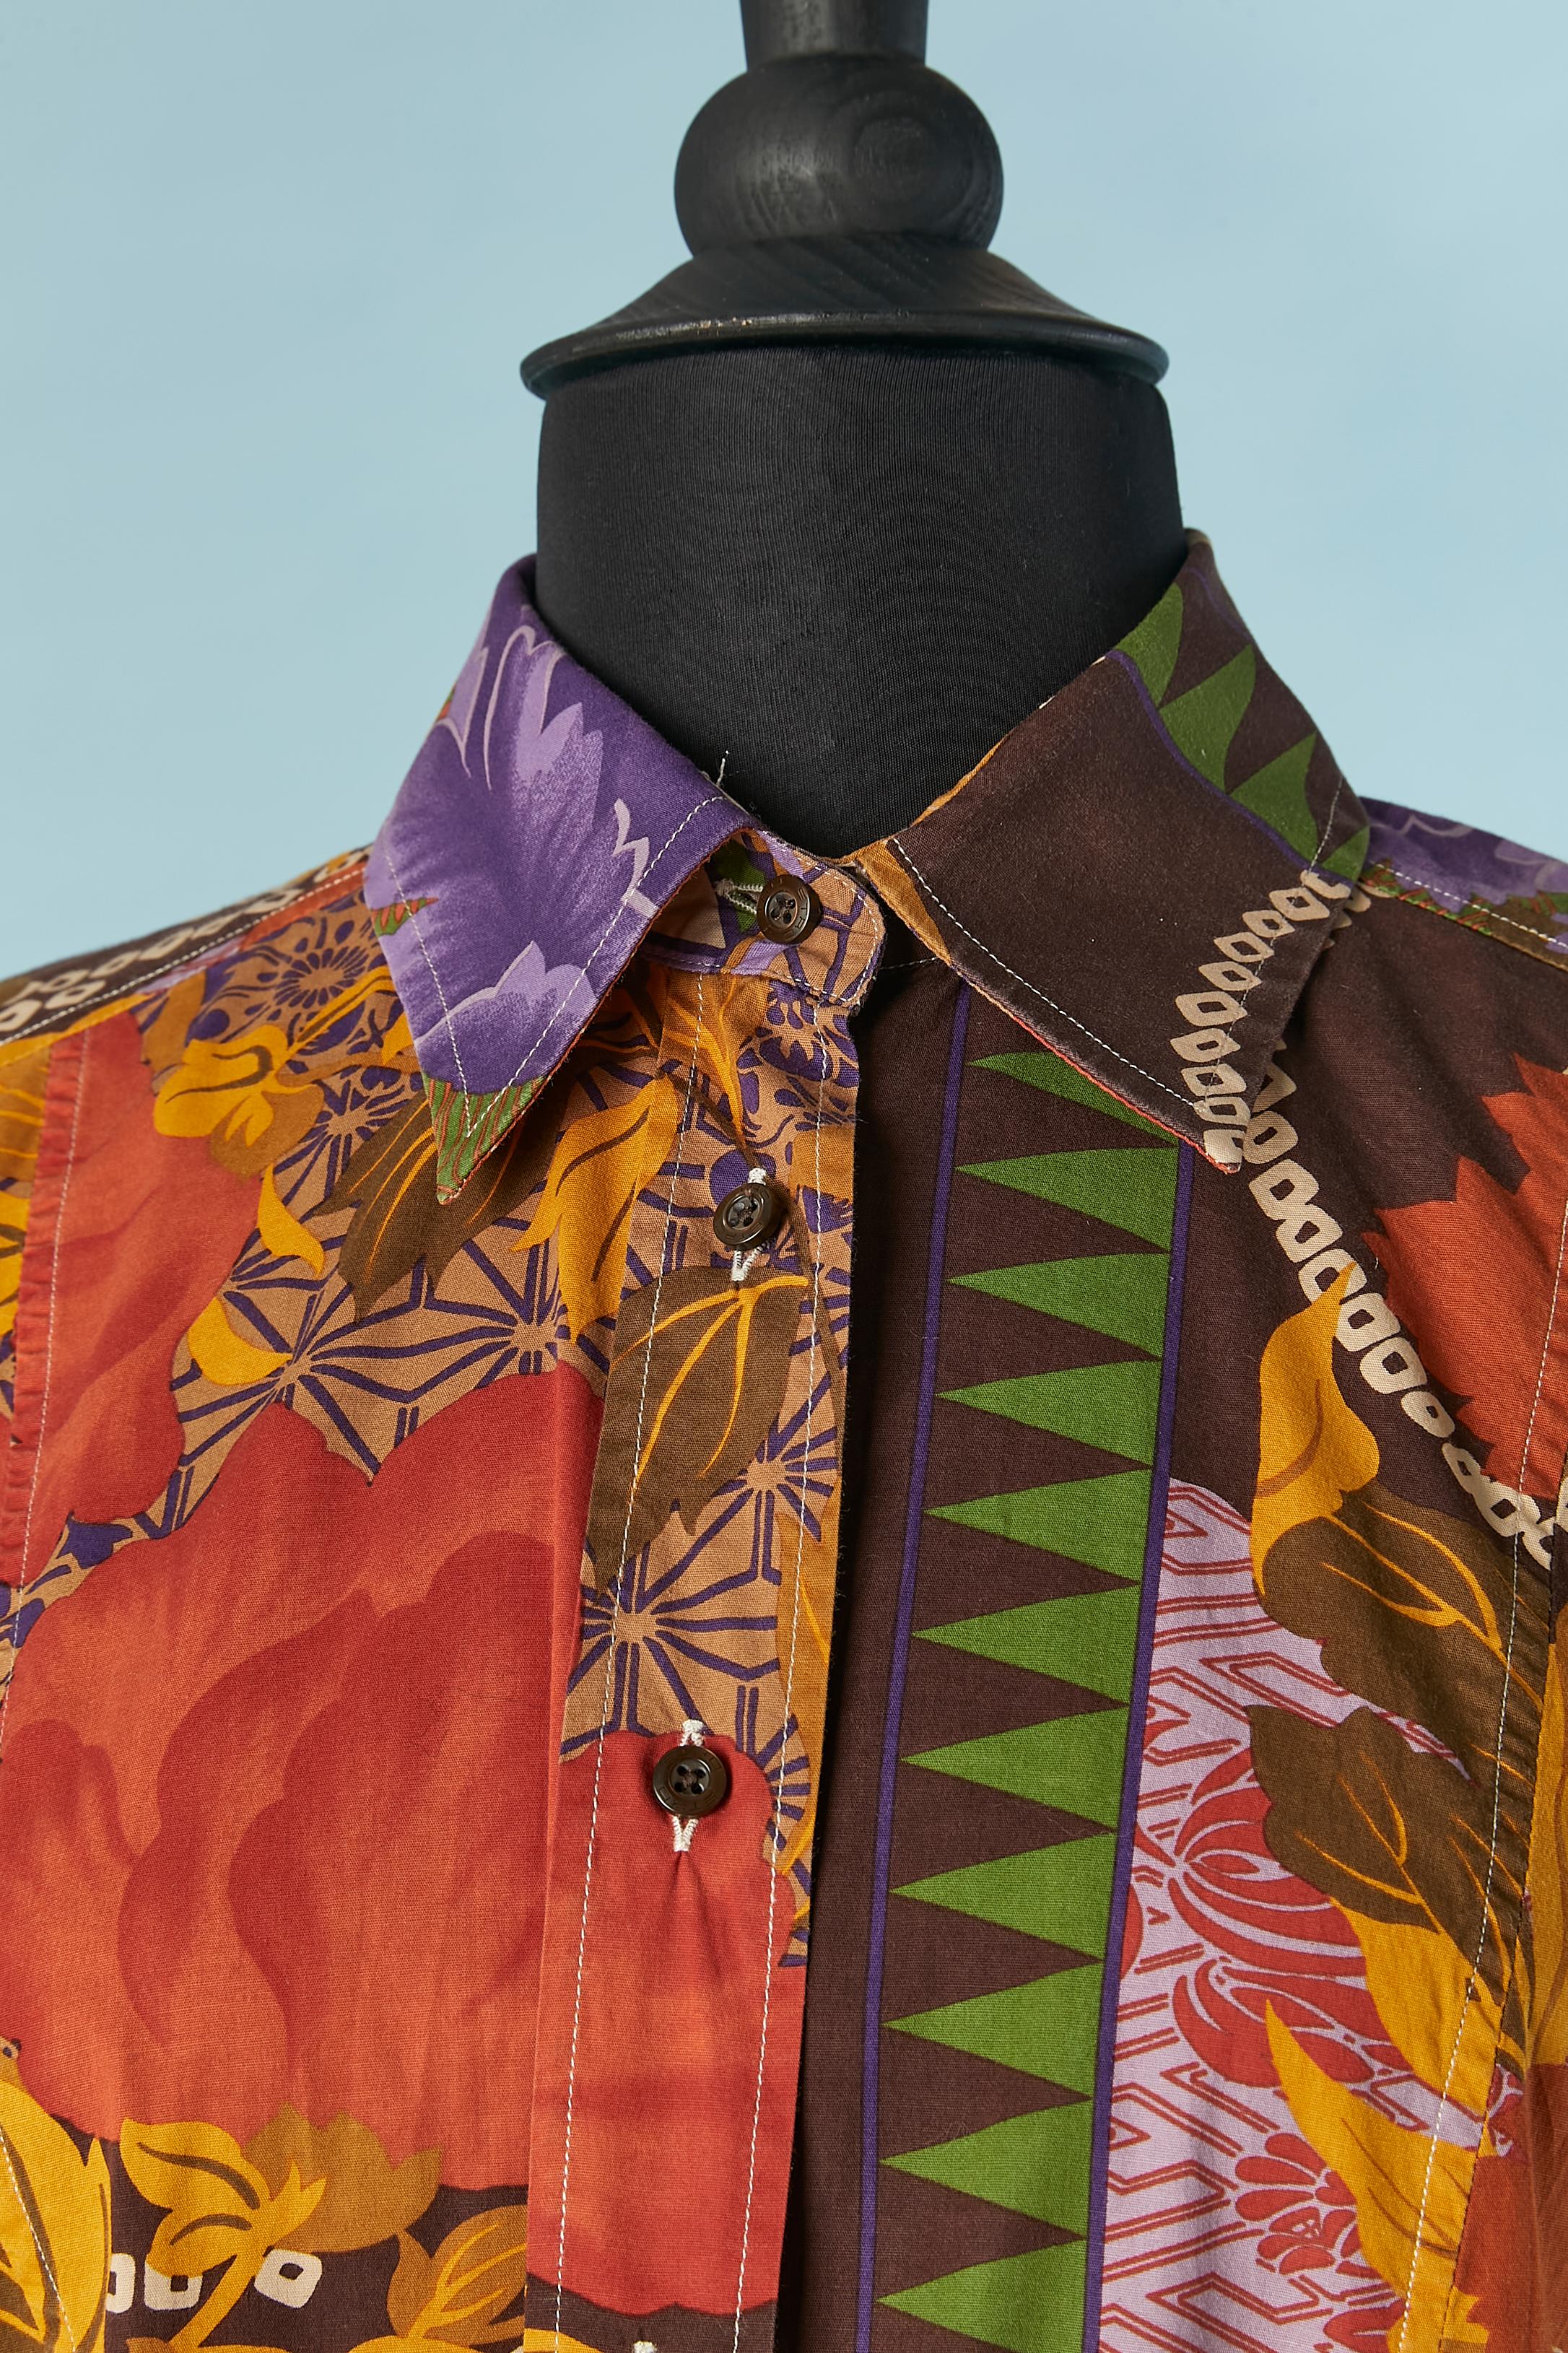 Printed cotton shirt. Branded button closure in the middle front
SIZE M/L 